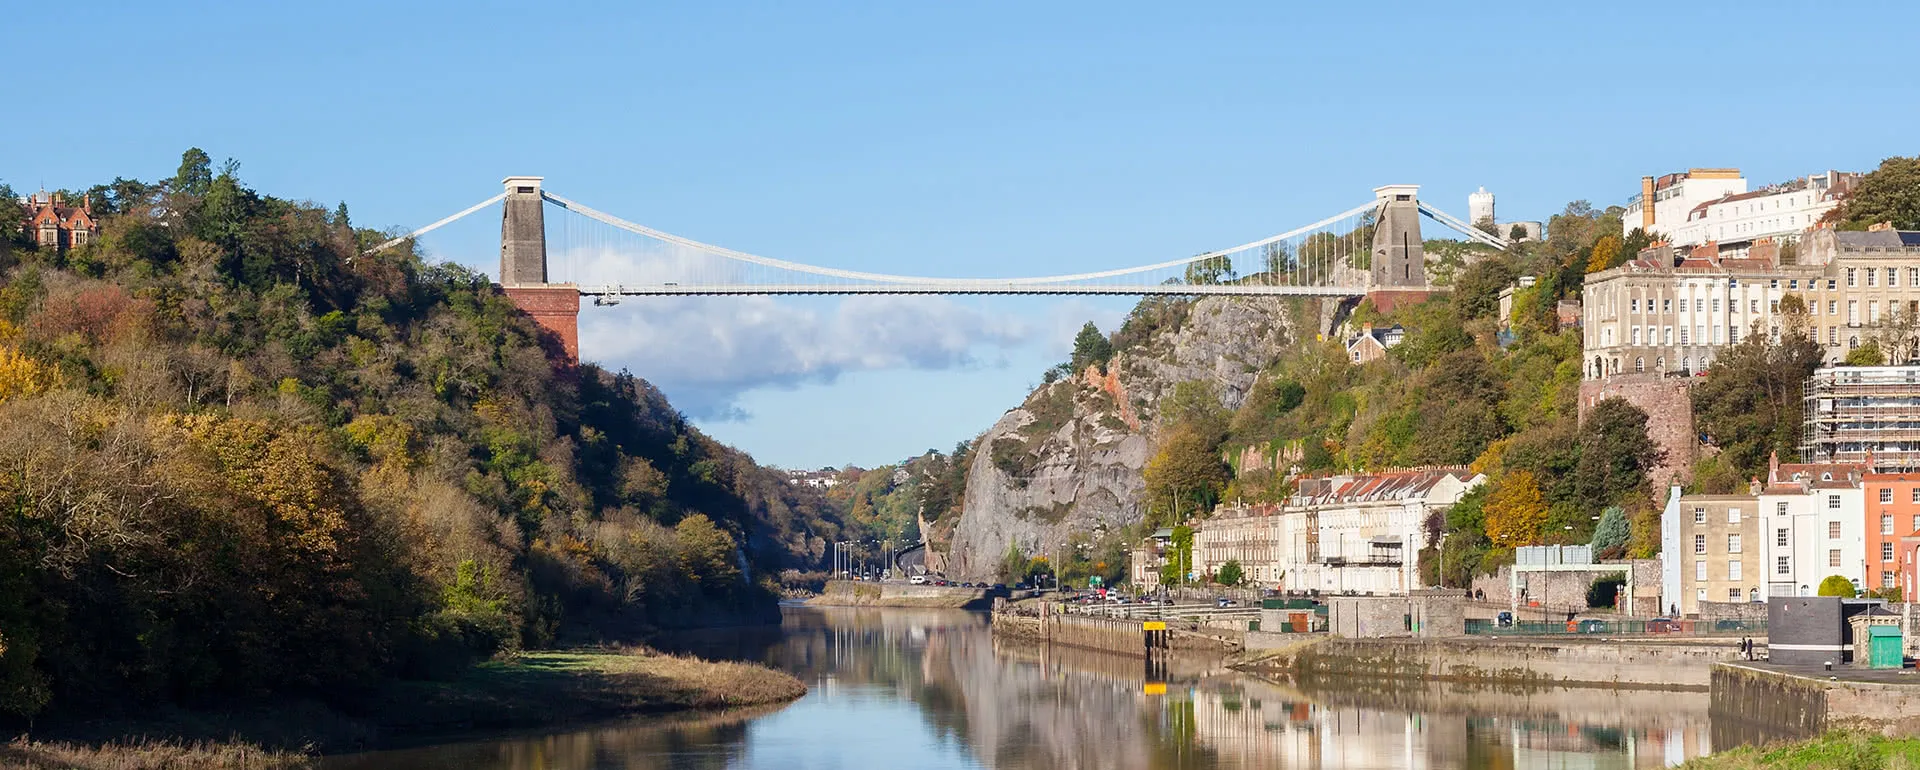 Bristol - the destination for workers